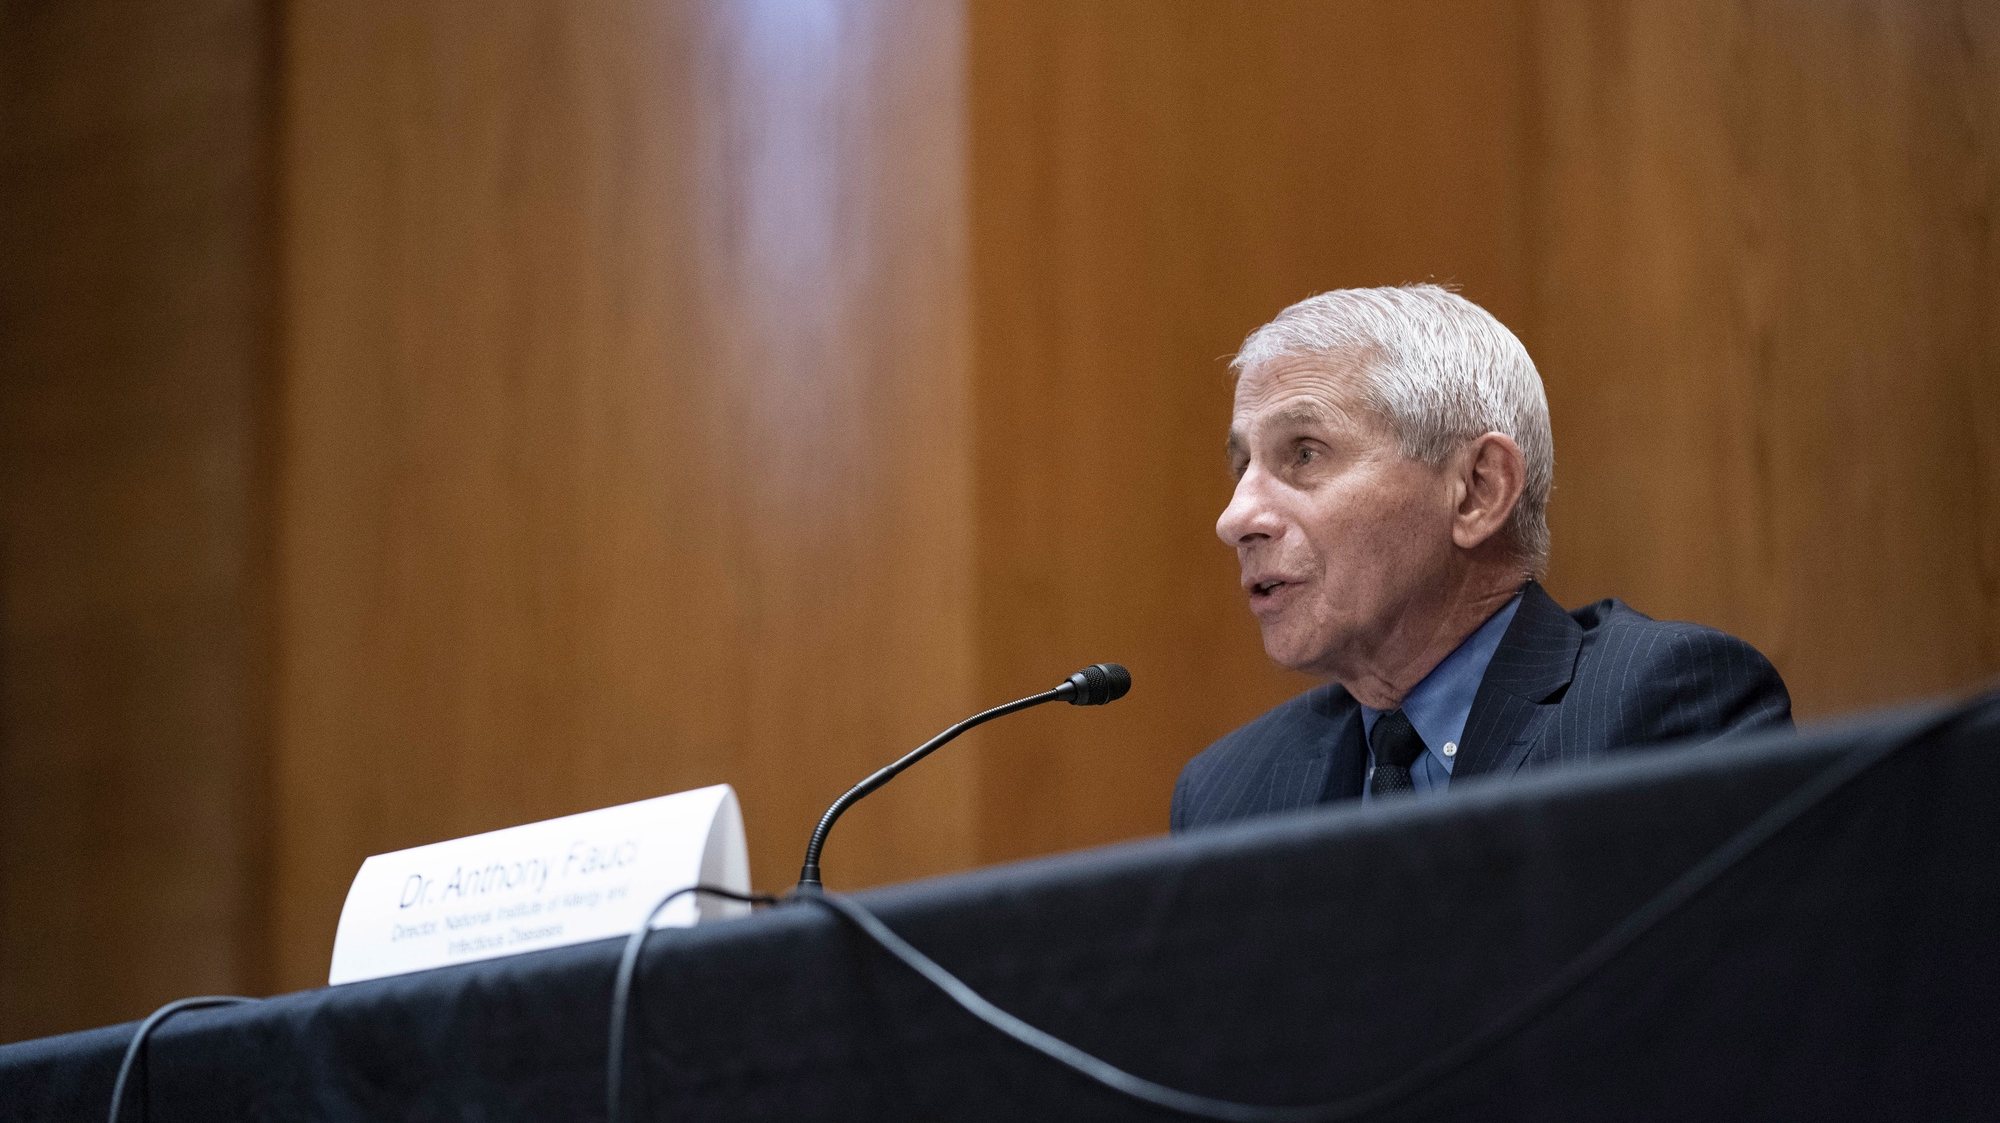 epa09229298 Dr. Anthony Fauci, director of the National Institute of Allergy and Infectious Diseases, speaks during a Senate Appropriations Labor, Health and Human Services Subcommittee hearing looking into the budget estimates for National Institute of Health (NIH) and state of medical research on Capitol Hill in Washington, DC, USA, 26 May 2021.  EPA/Sarah Silbiger / POOL